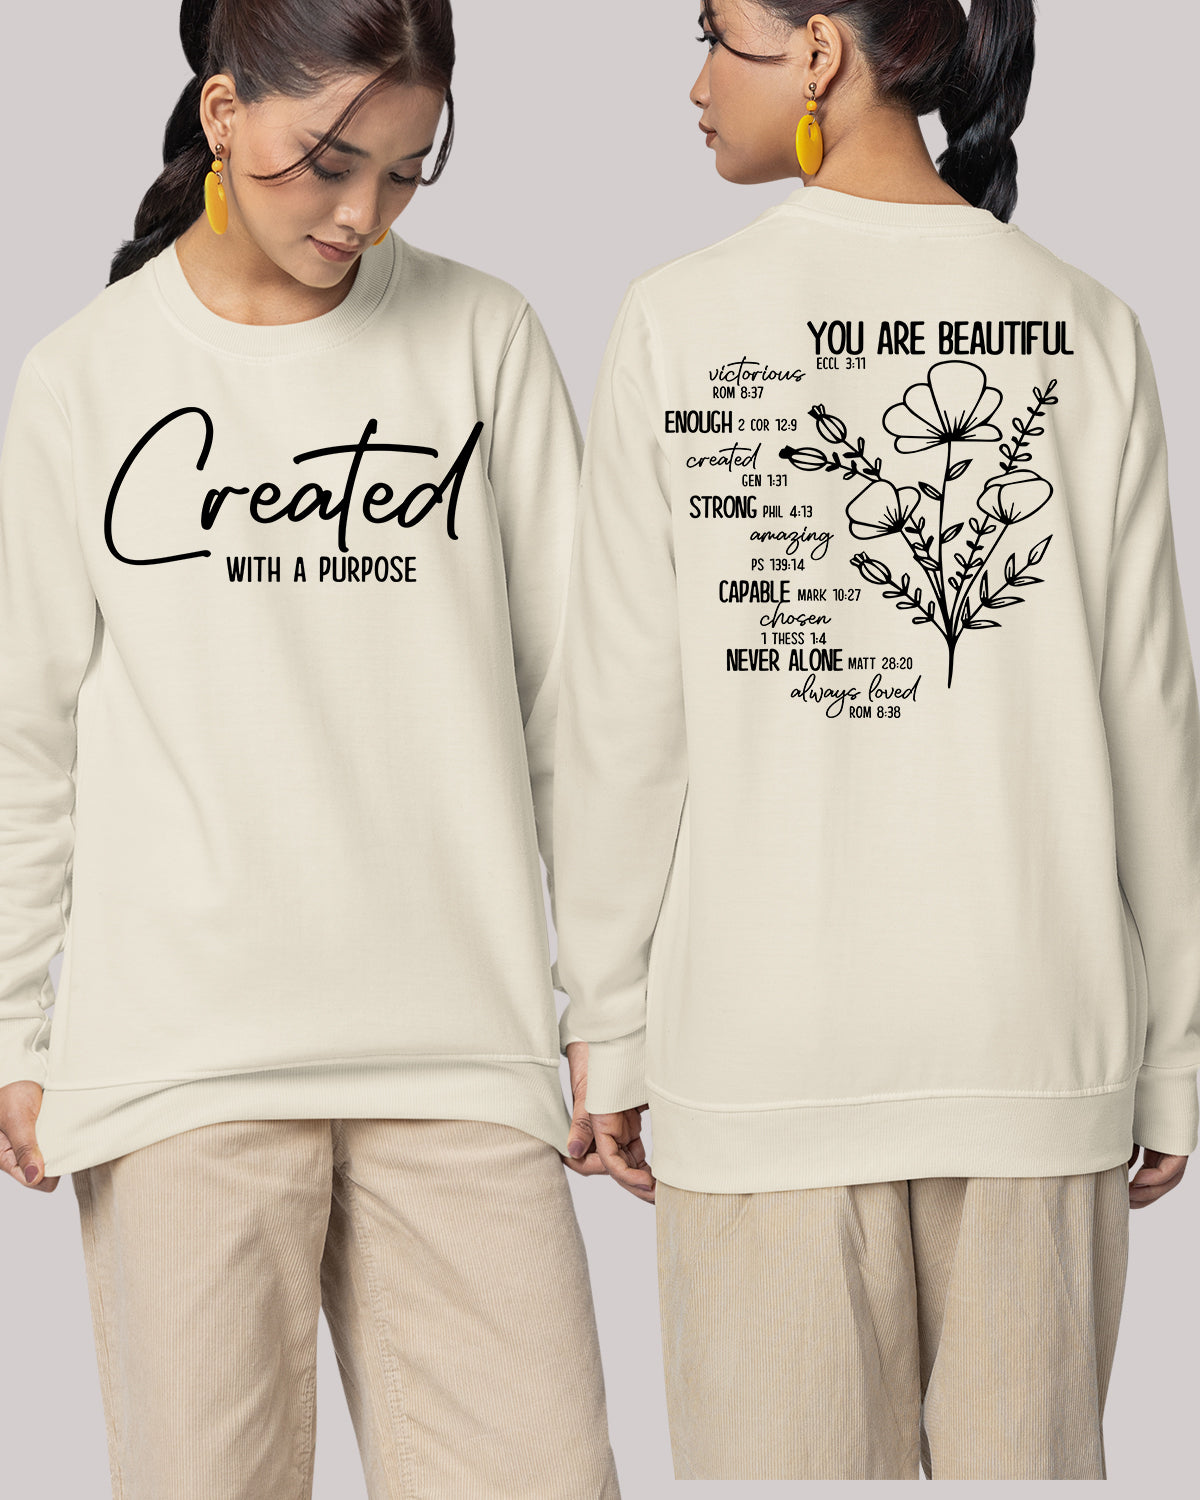 Created With A Purpose Christian Sweatshirts - Front & Back Printed